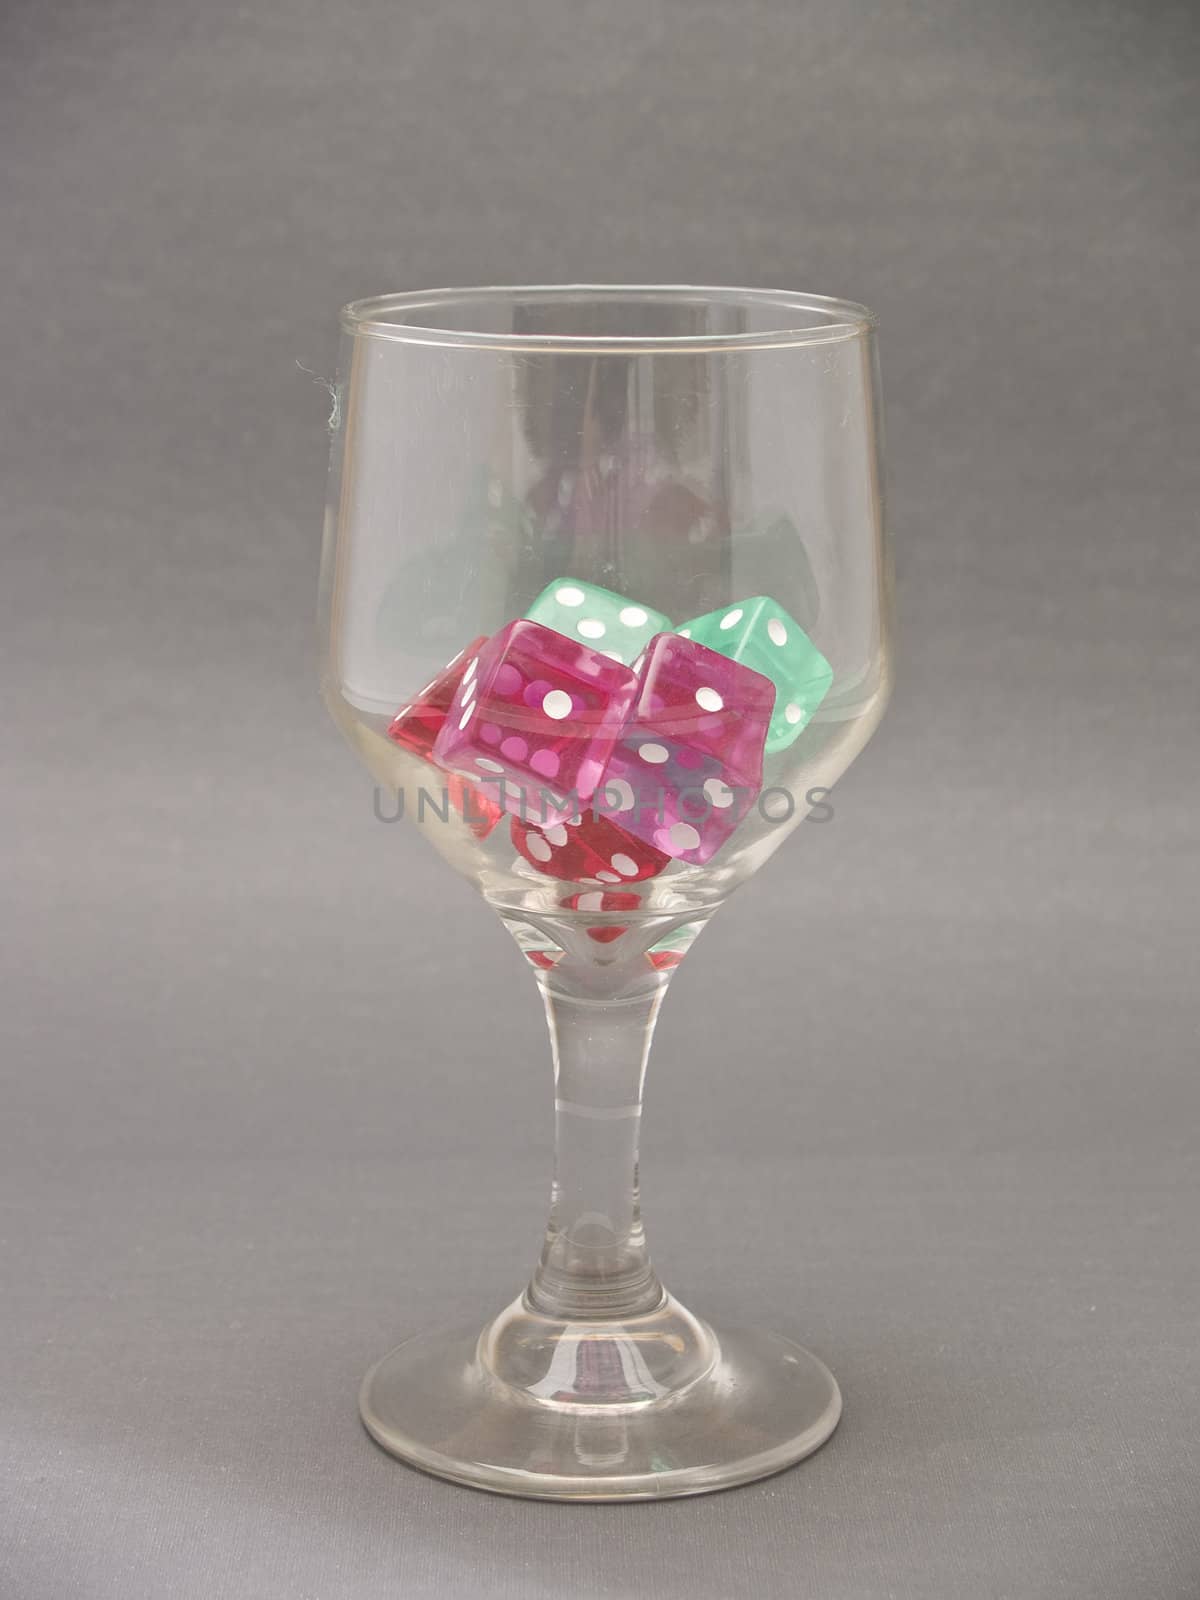  glass cup with dice